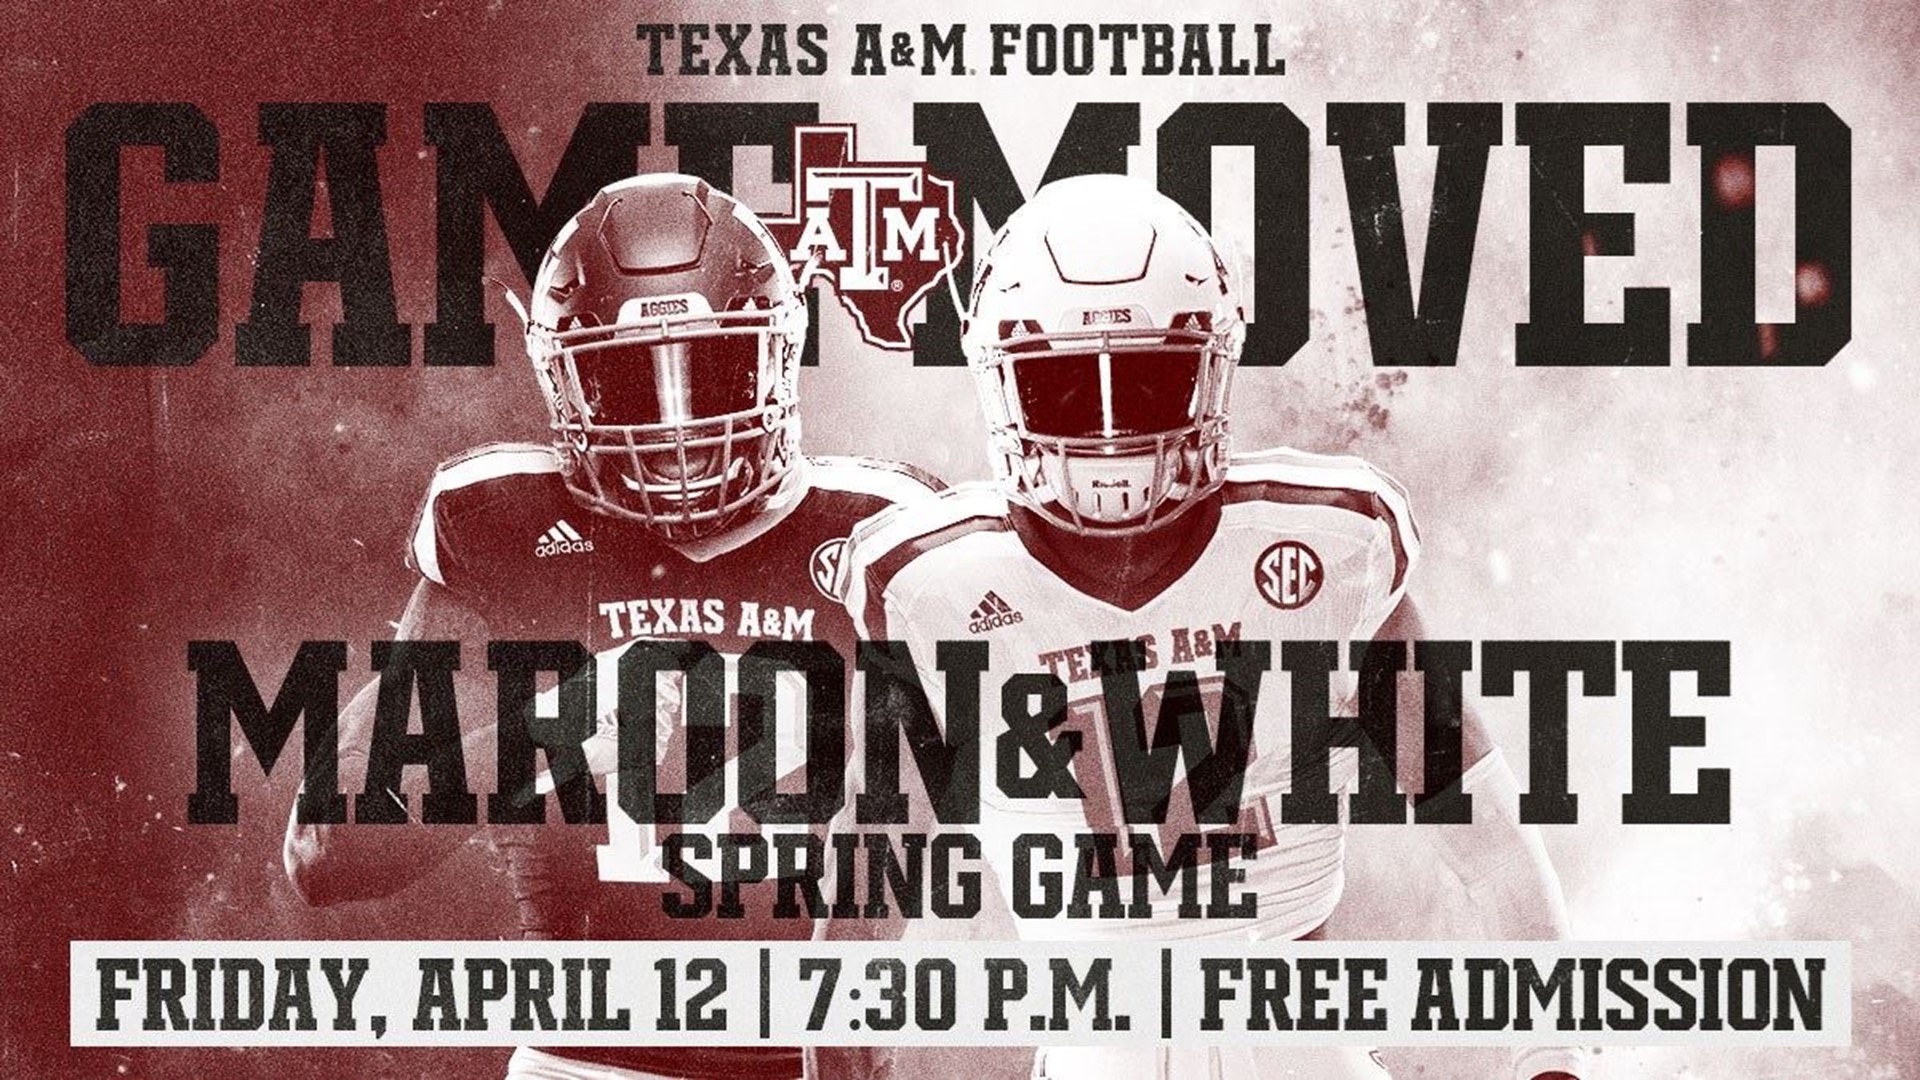 Texas A&M Football's 2019 Maroon & White Game rescheduled for Friday